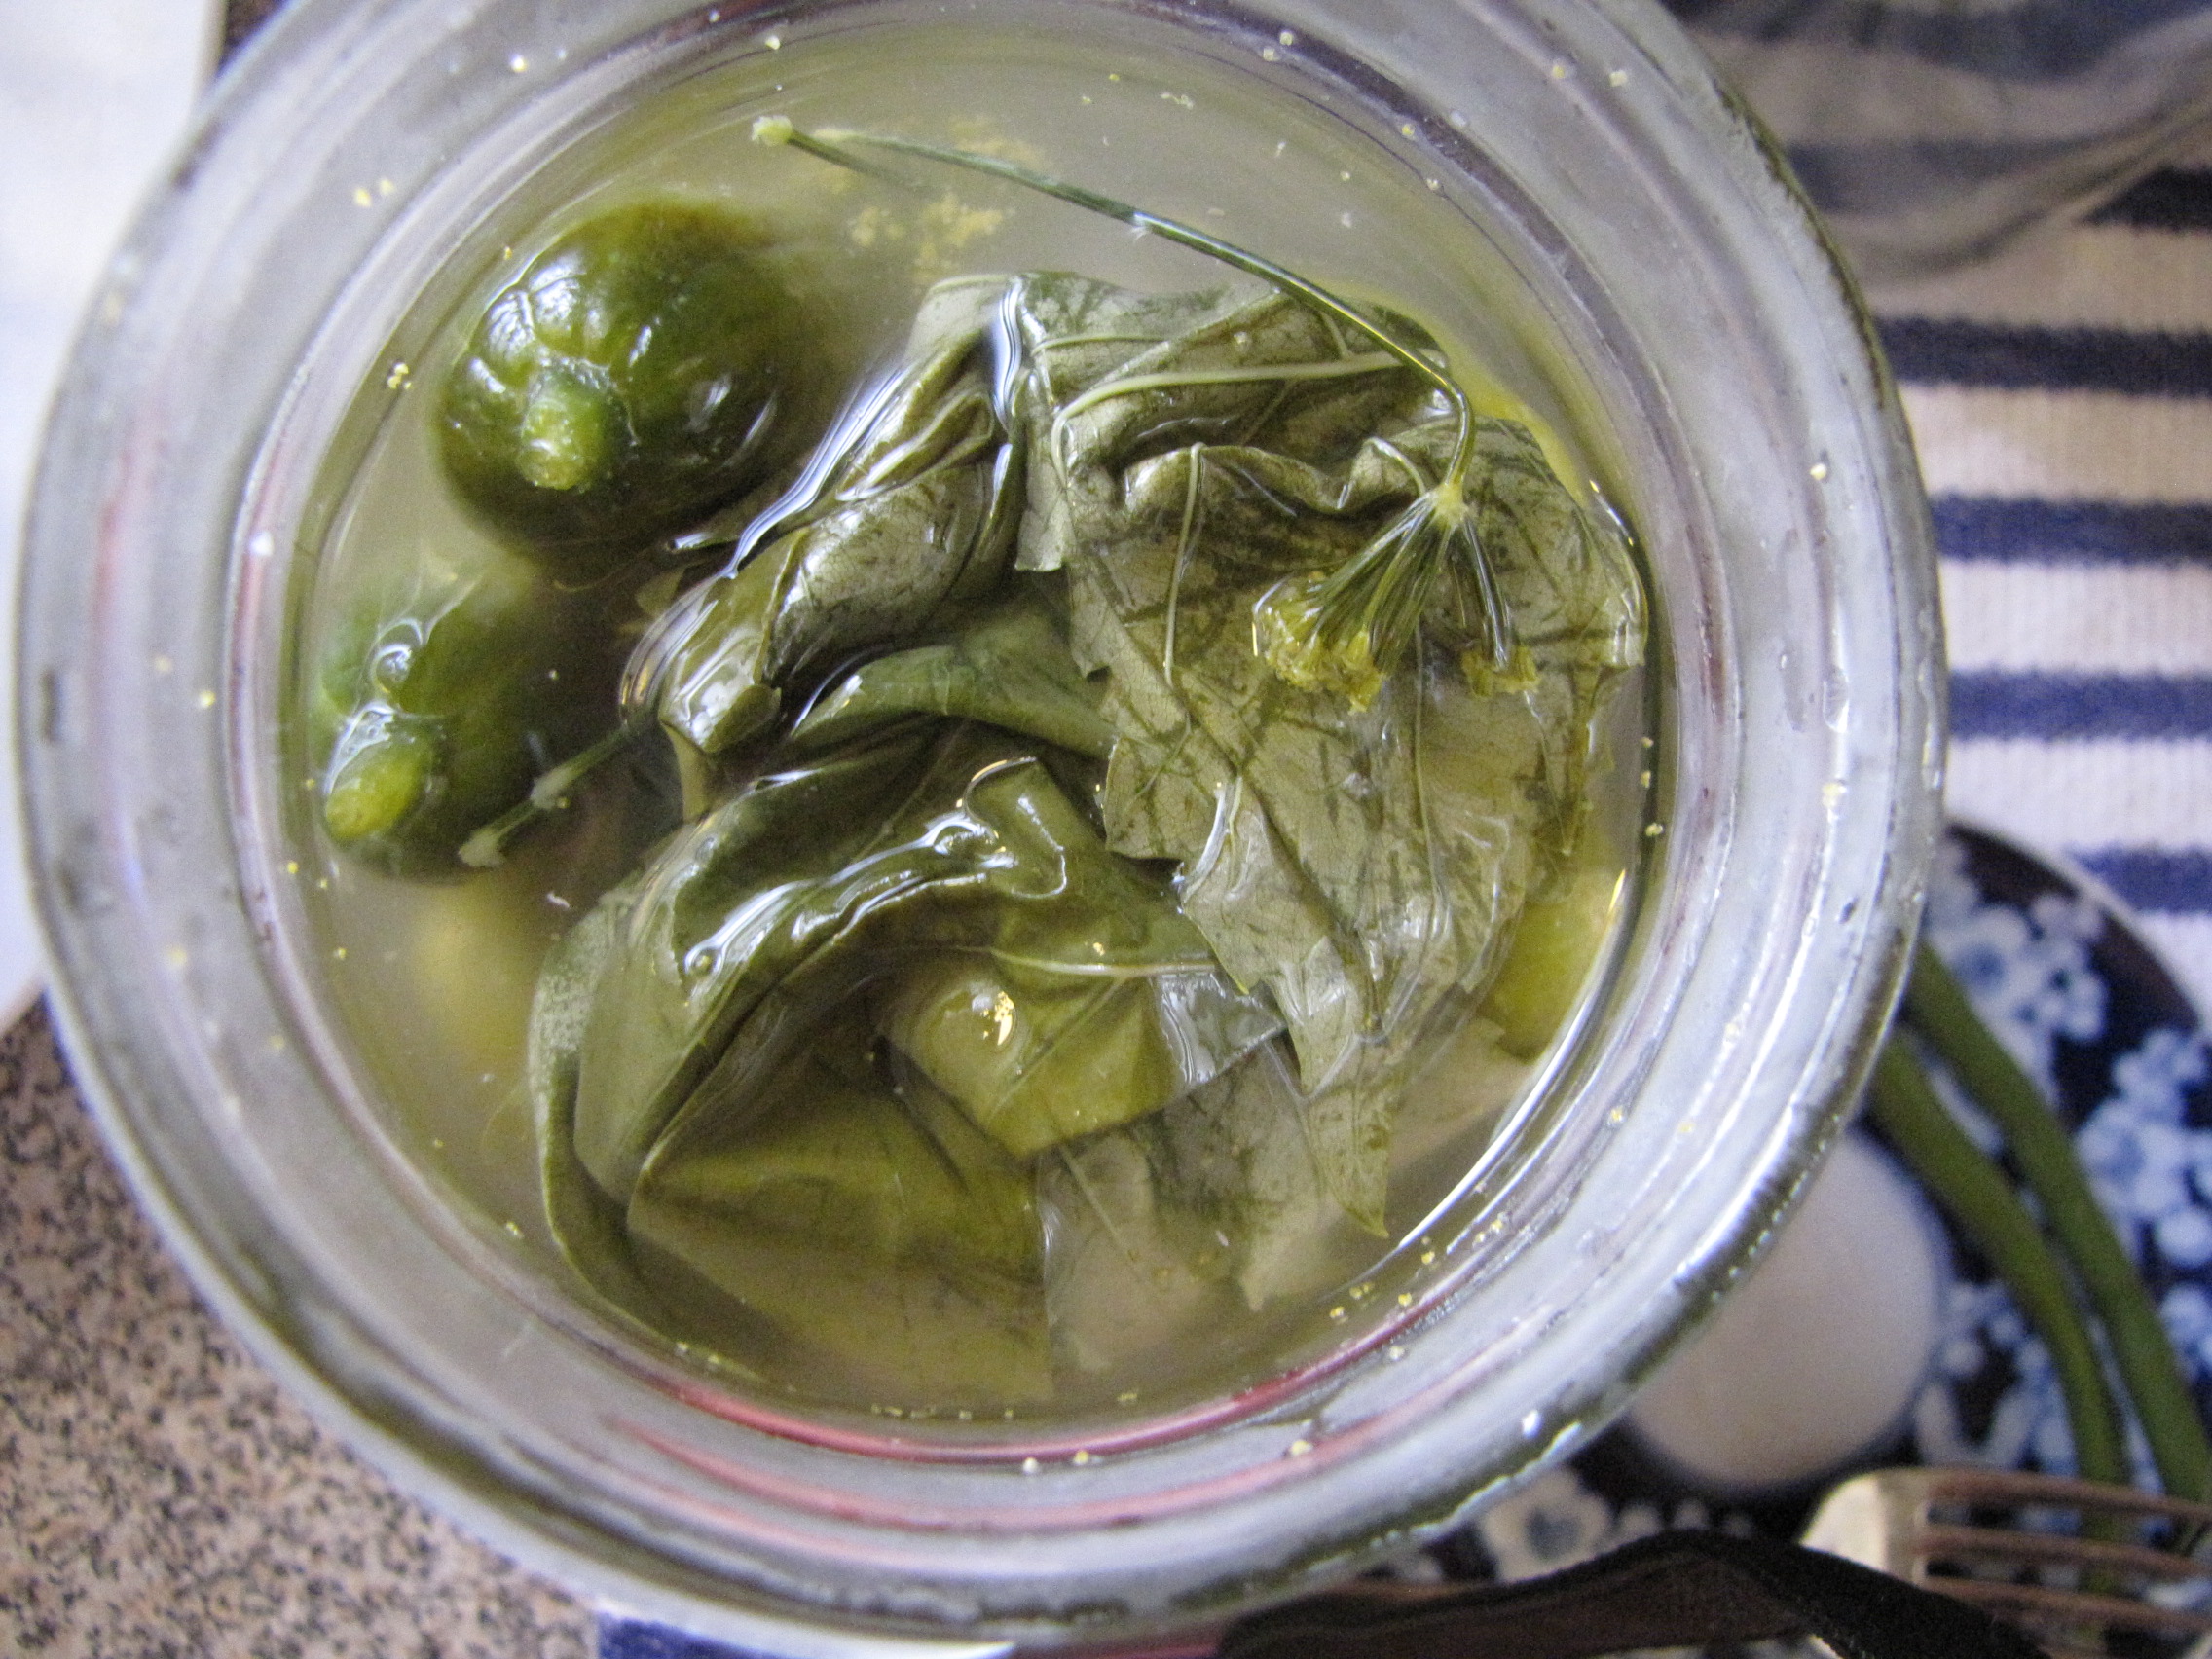 lactofermented dill pickles.  These are half-sours, with grape leaves floating on top to keep the pickles crisp. 